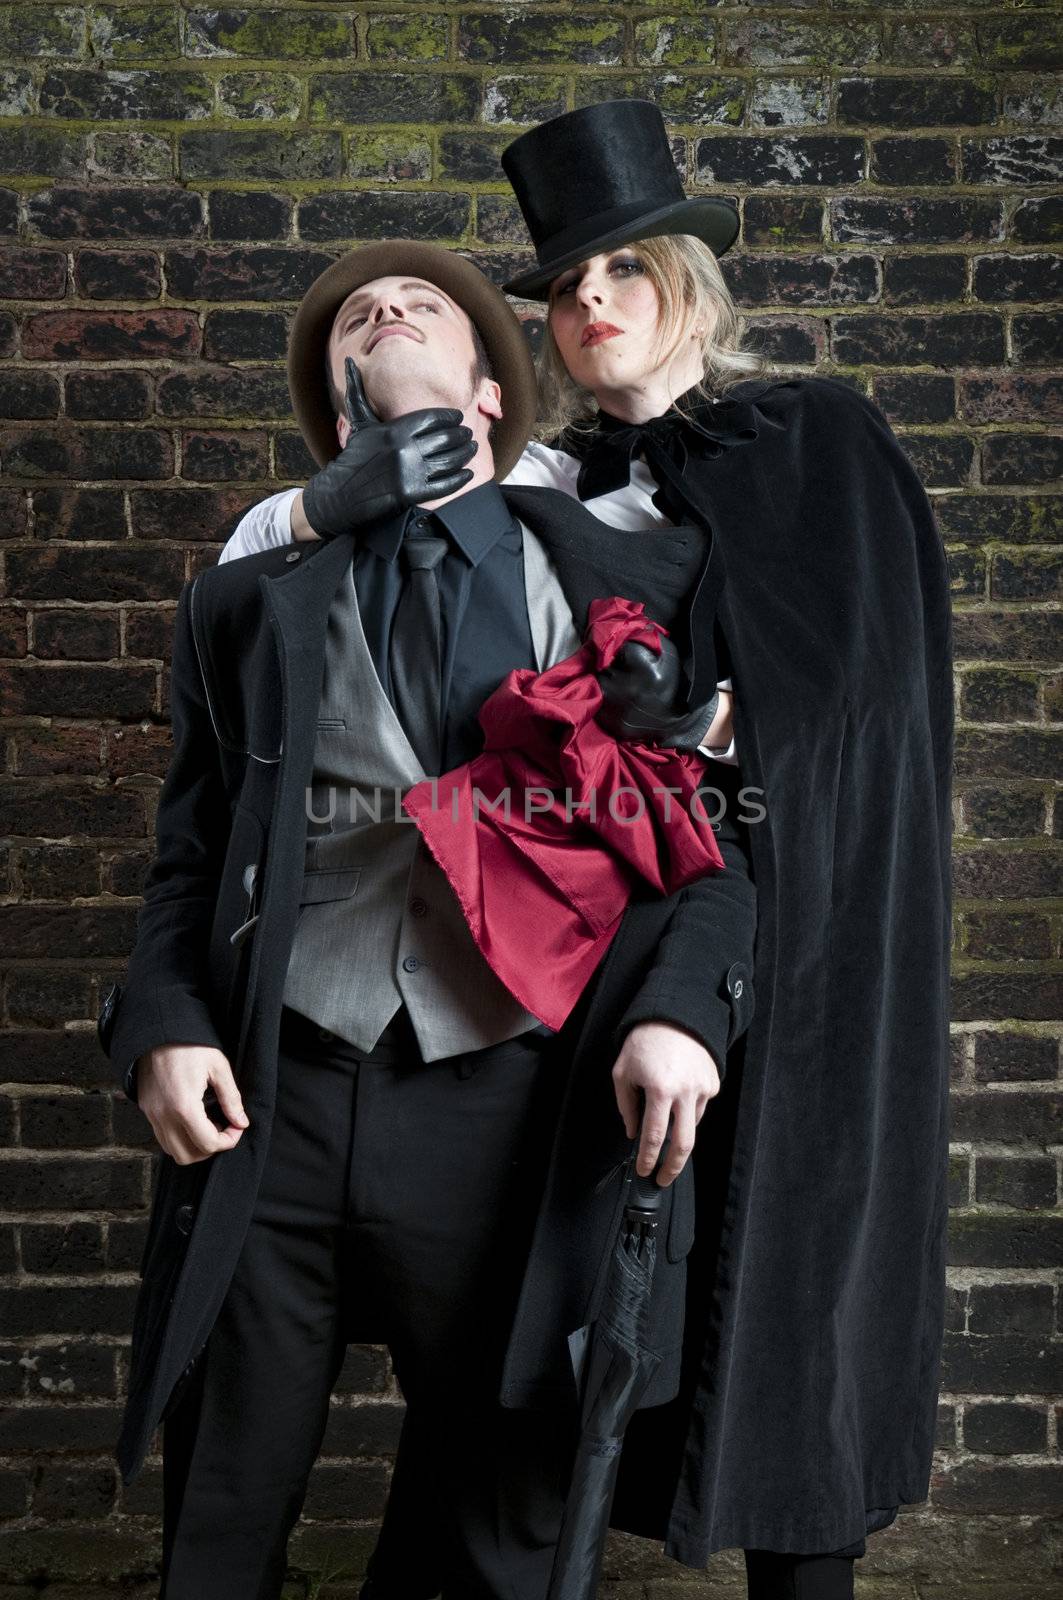 Fashion shot of woman  dressed as Jack the Ripper stealing man's handkerchief.